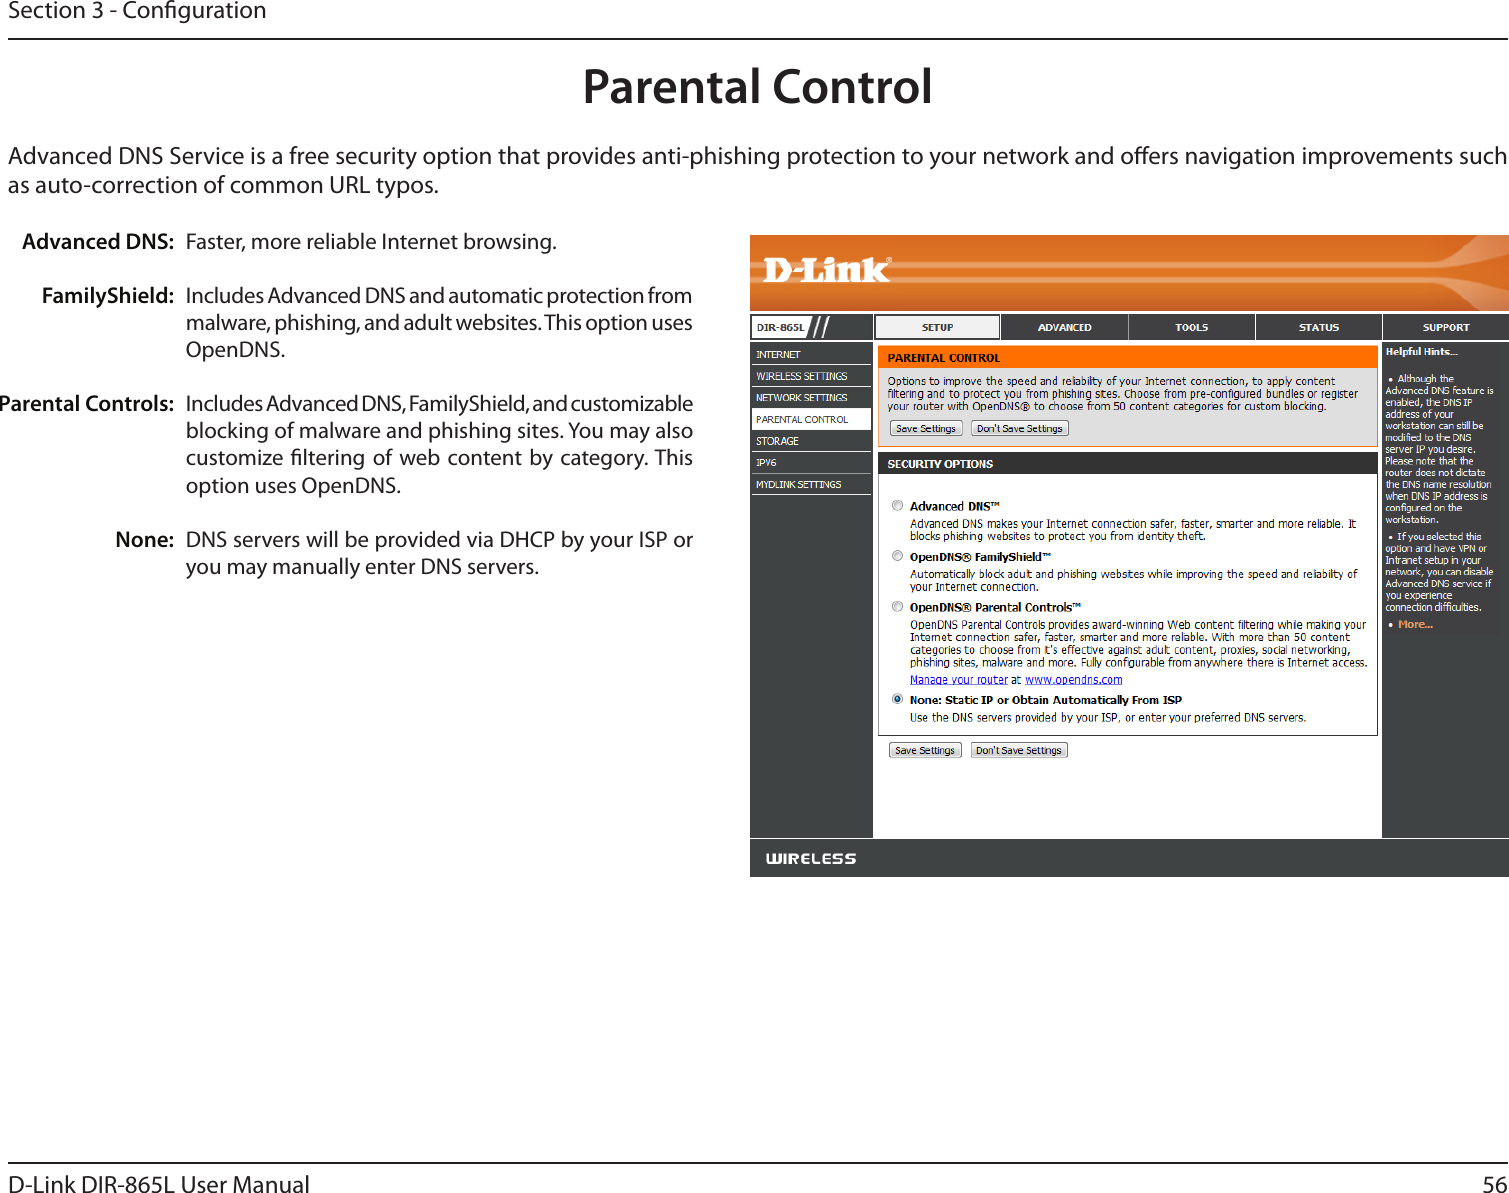 56D-Link DIR-865L User ManualSection 3 - CongurationParental ControlAdvanced DNS:FamilyShield:Parental Controls:None:Faster, more reliable Internet browsing.Includes Advanced DNS and automatic protection from malware, phishing, and adult websites. This option uses OpenDNS.Includes Advanced DNS, FamilyShield, and customizable blocking of malware and phishing sites. You may also customize ltering of web content by category. This option uses OpenDNS.DNS servers will be provided via DHCP by your ISP or you may manually enter DNS servers. Advanced DNS Service is a free security option that provides anti-phishing protection to your network and oers navigation improvements such as auto-correction of common URL typos.